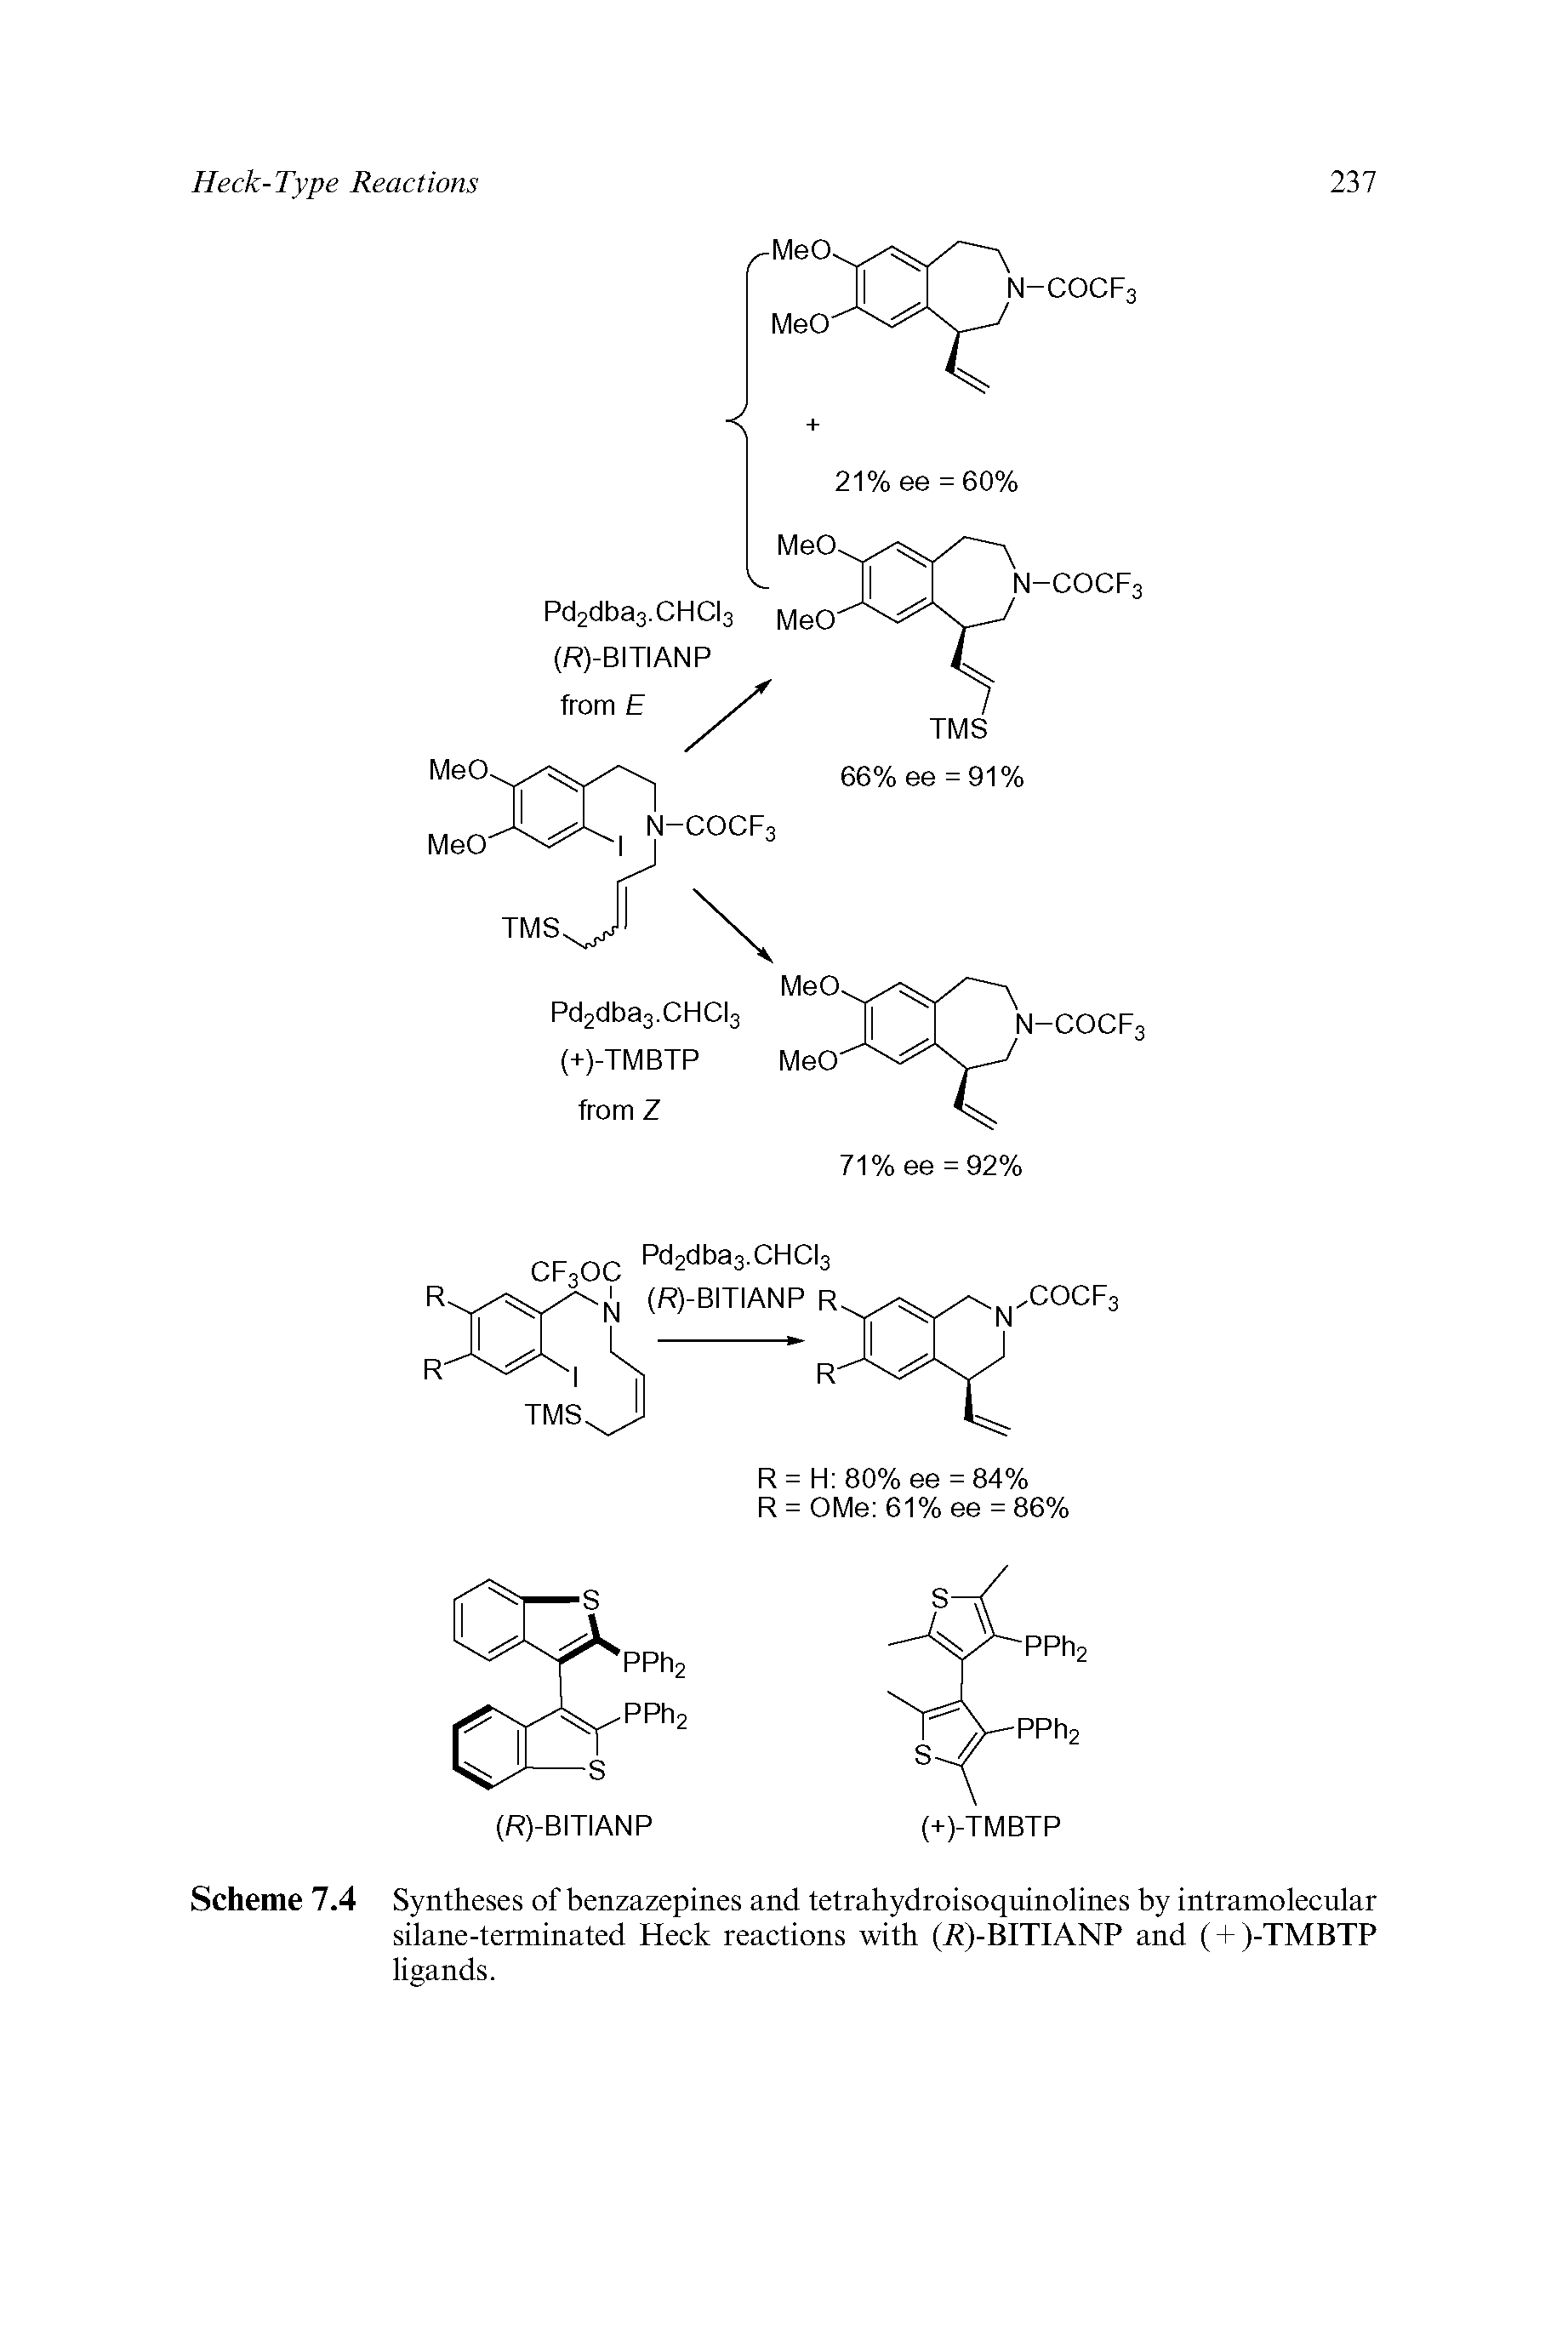 Scheme 7.4 Syntheses of benzazepines and tetrahydroisoquinolines by intramolecular silane-terminated Heck reactions with (T )-BITIANP and ( + )-TMBTP ligands.